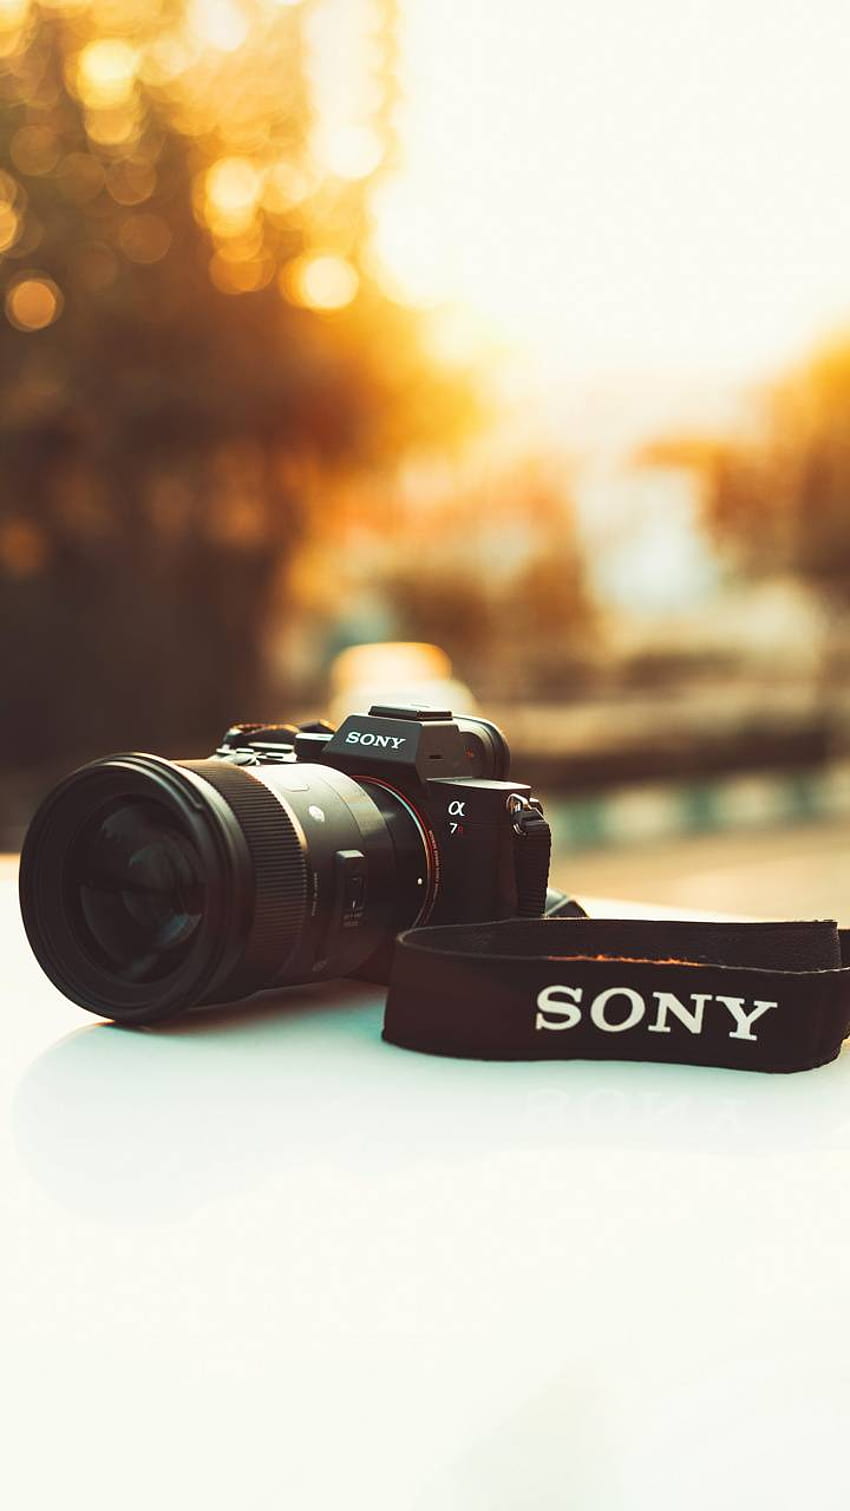 The State of the Global Digital Camera Market in 2023